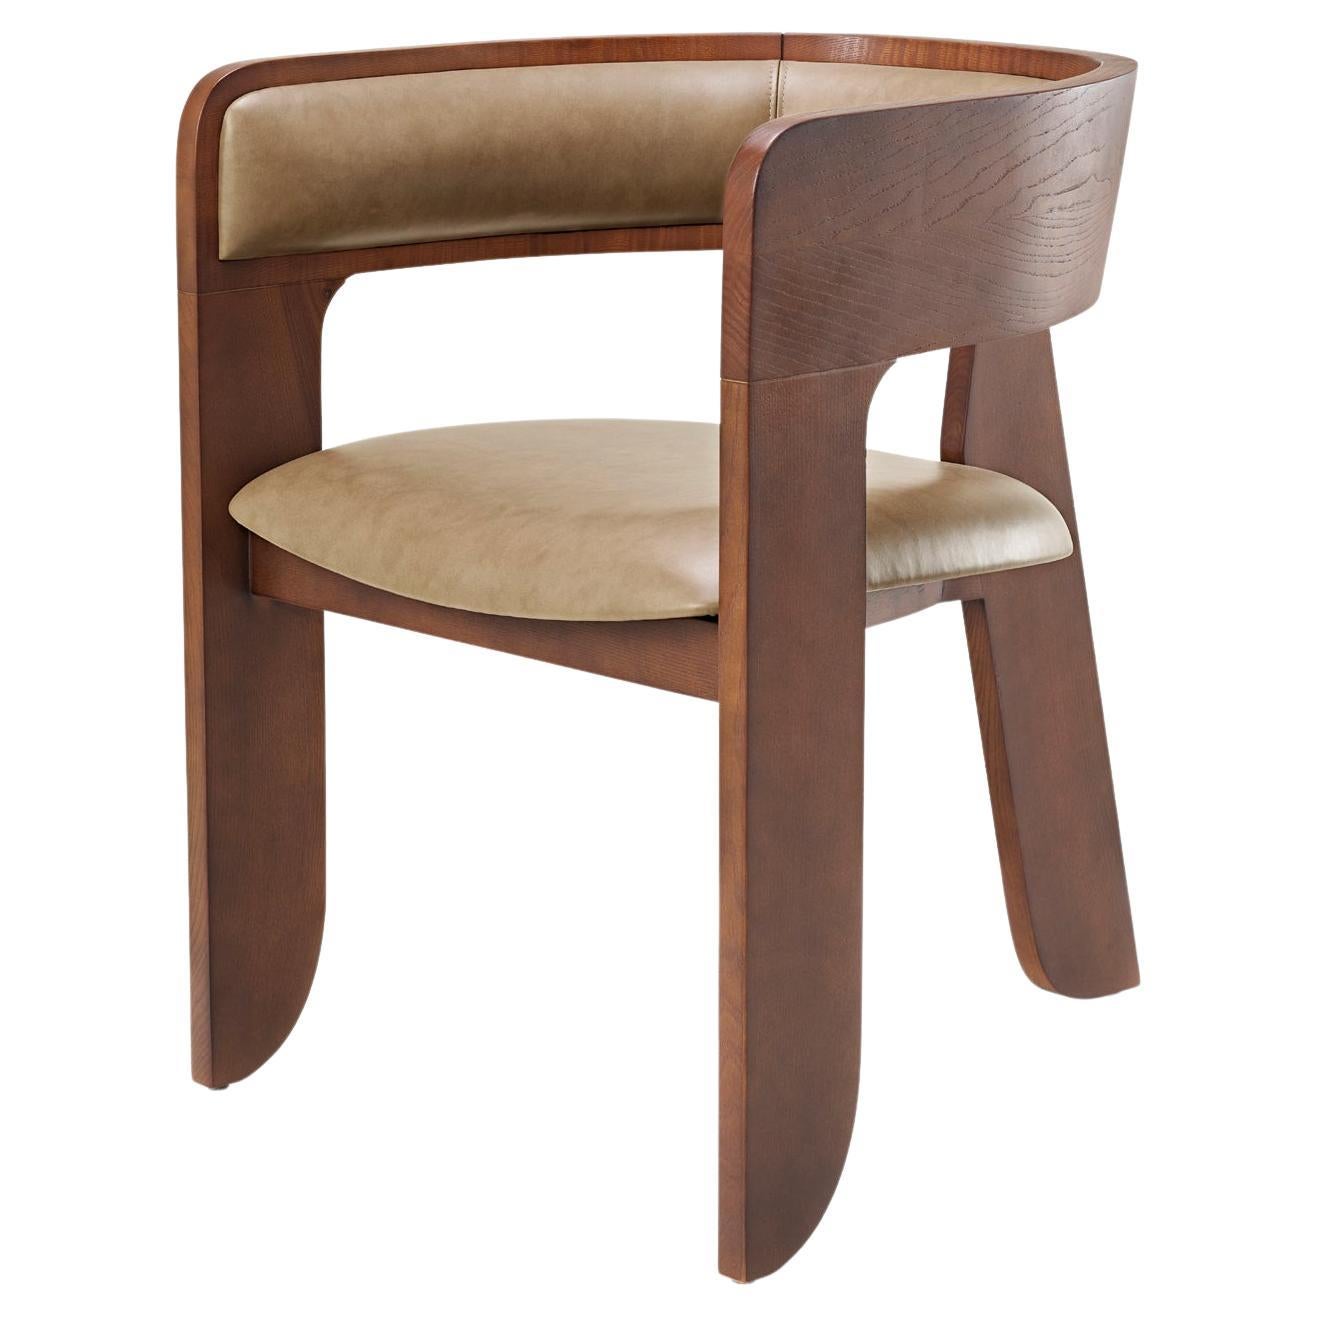 Jean Chair, Upholstery in Leather, Solid Ash Wood with Stain Finish